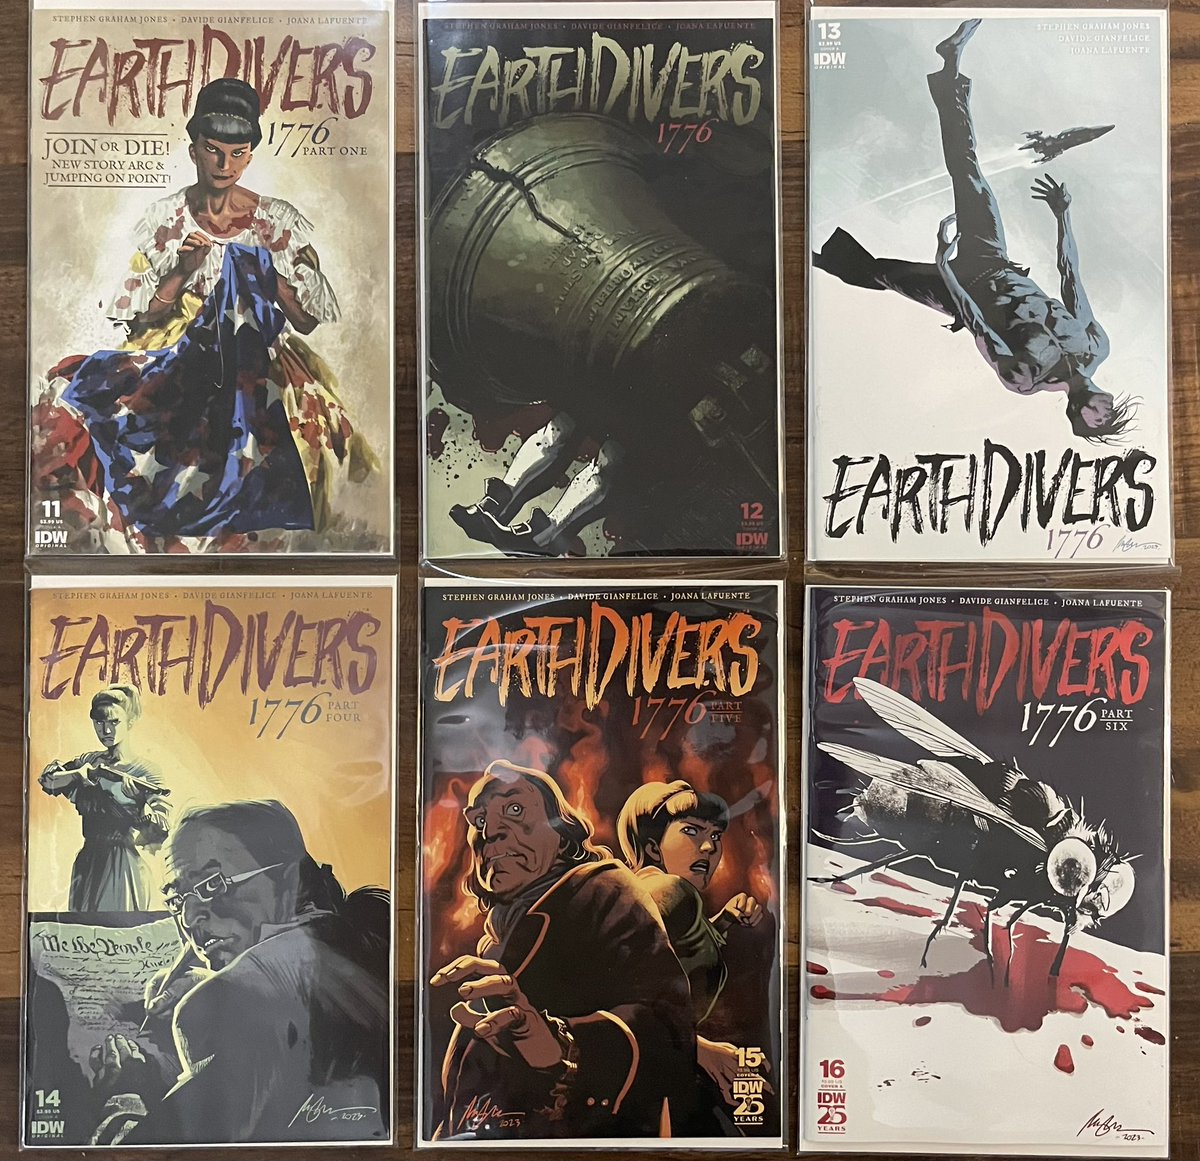 Issue 16 of @SGJ72’s EARTHDIVERS dropped this week from @IDWPublishing, completing the 1776 arc! I’ve been saving these issues to read in one fell swoop. It’s a very provocative comic. The Killing Columbus arc includes horrifying imagery reflecting the 1862 Dakota mass hanging.